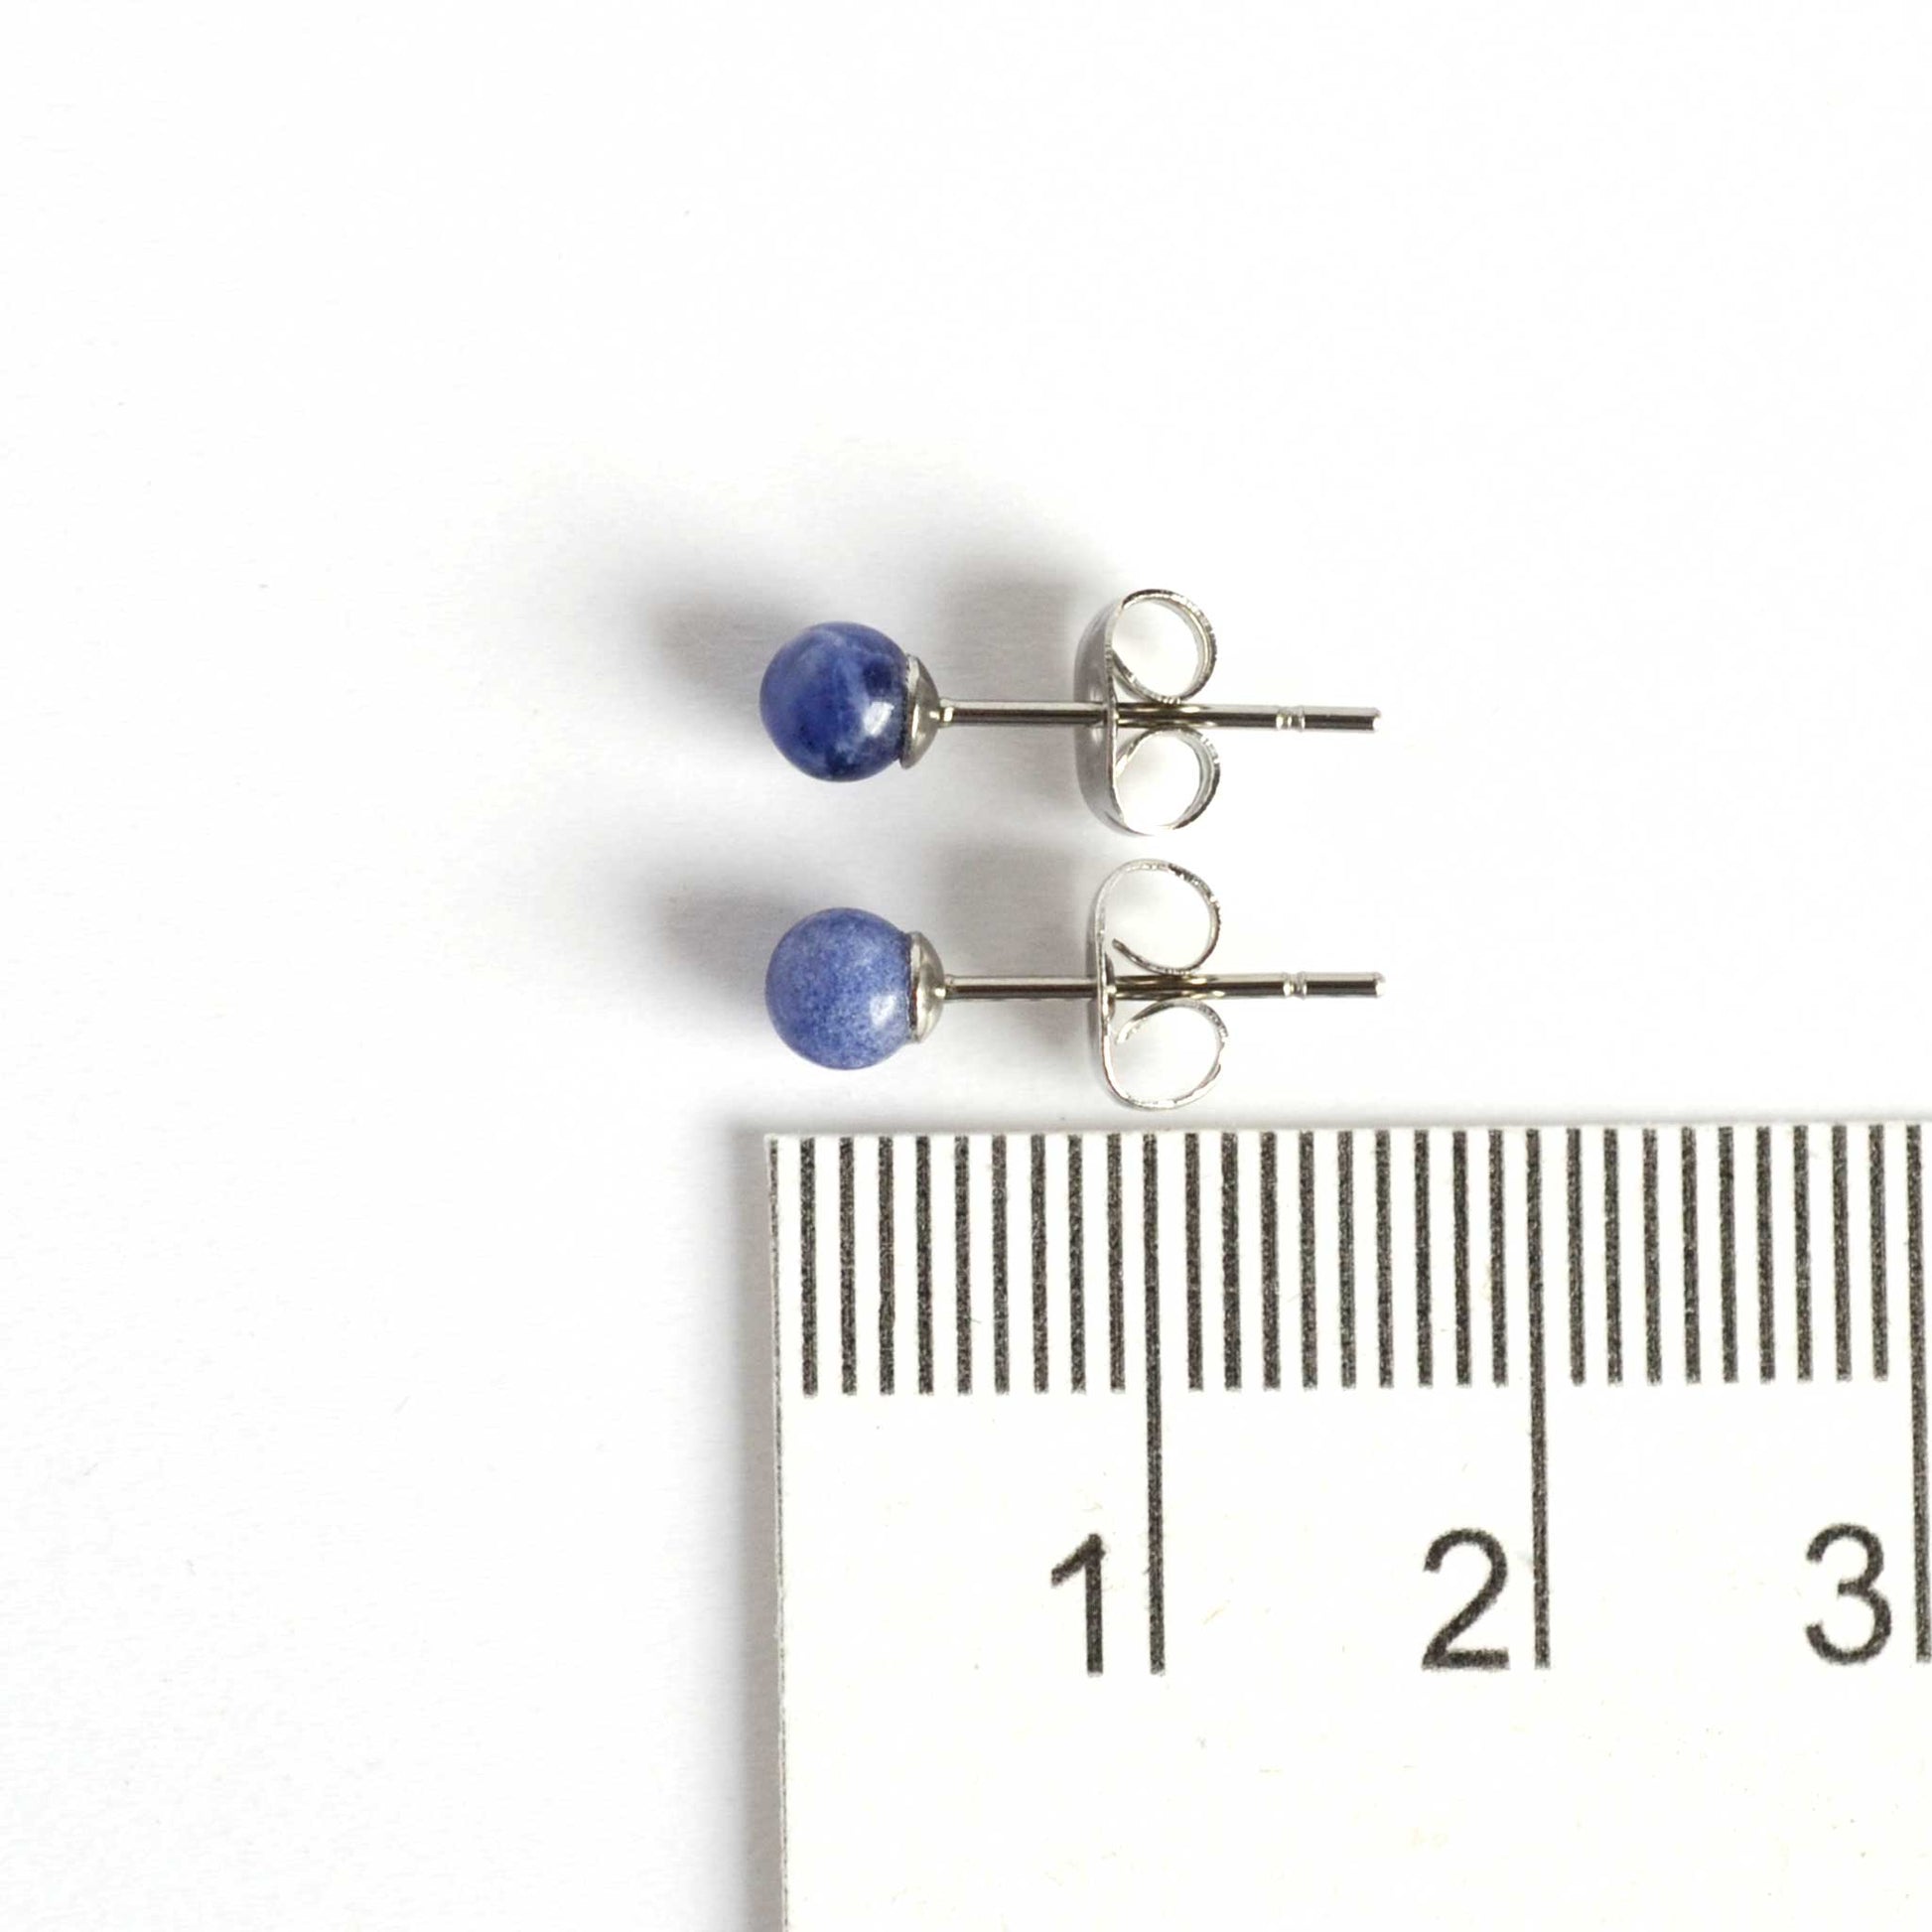 4mm Sodalite small blue stud earrings next to ruler